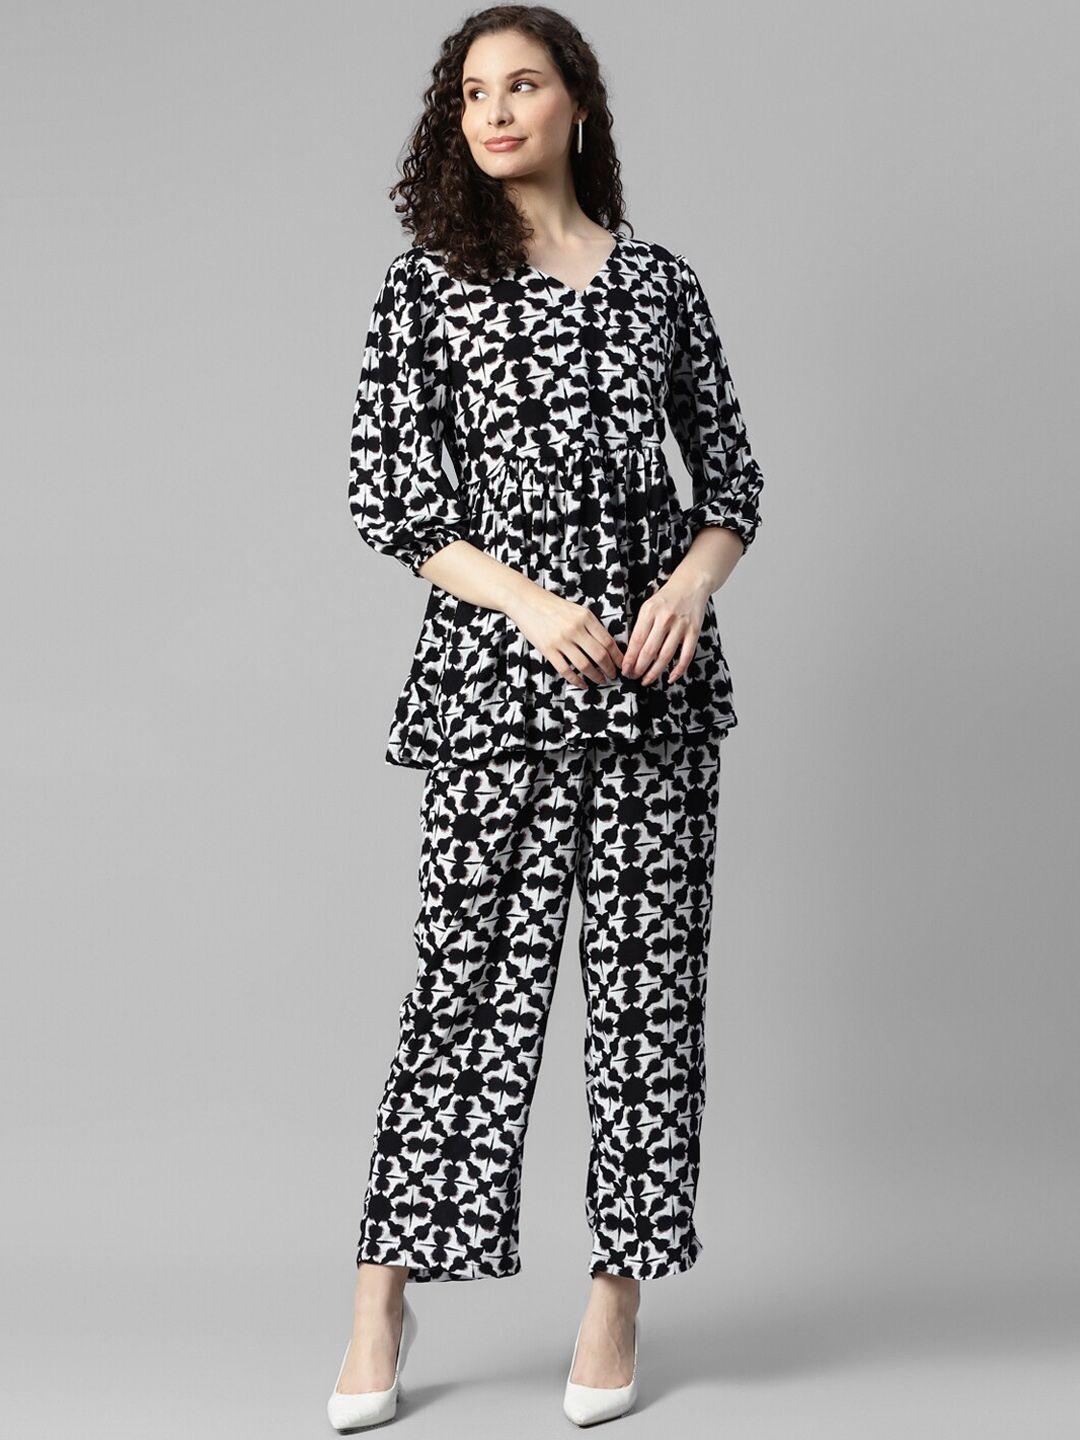 deebaco v-neck printed top & mid-rise trouser co-ords